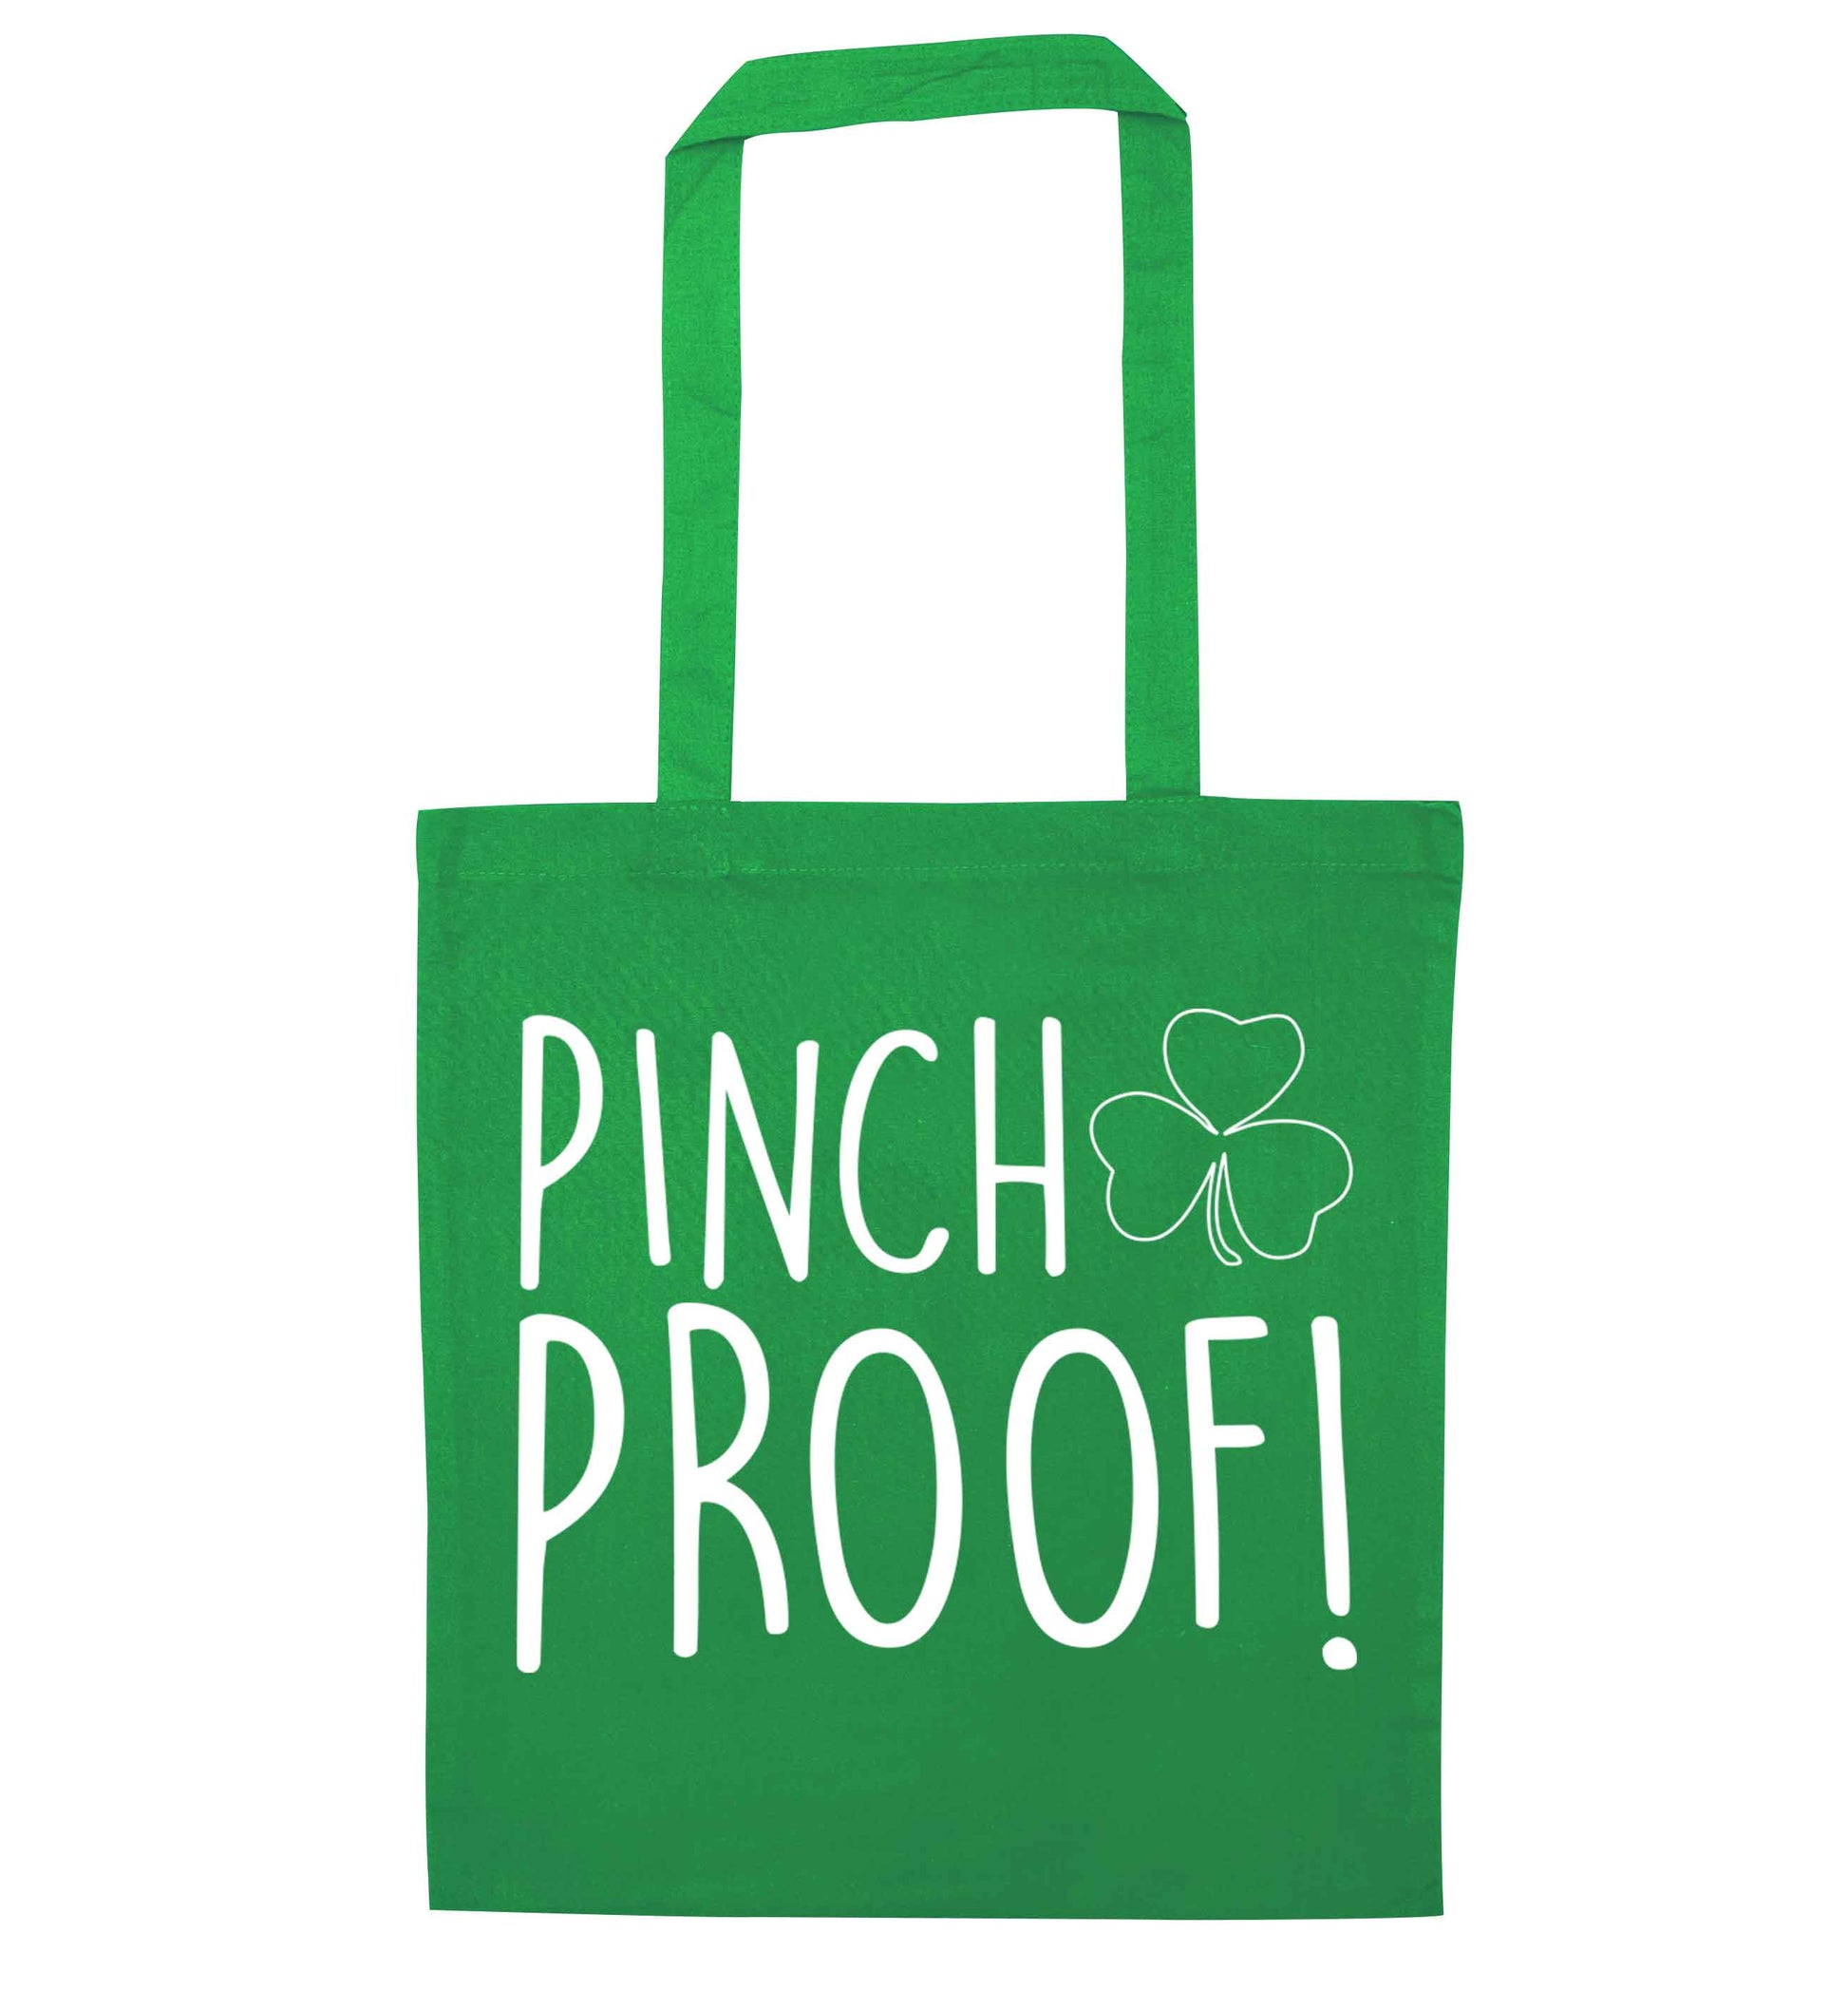 Pinch Proof green tote bag